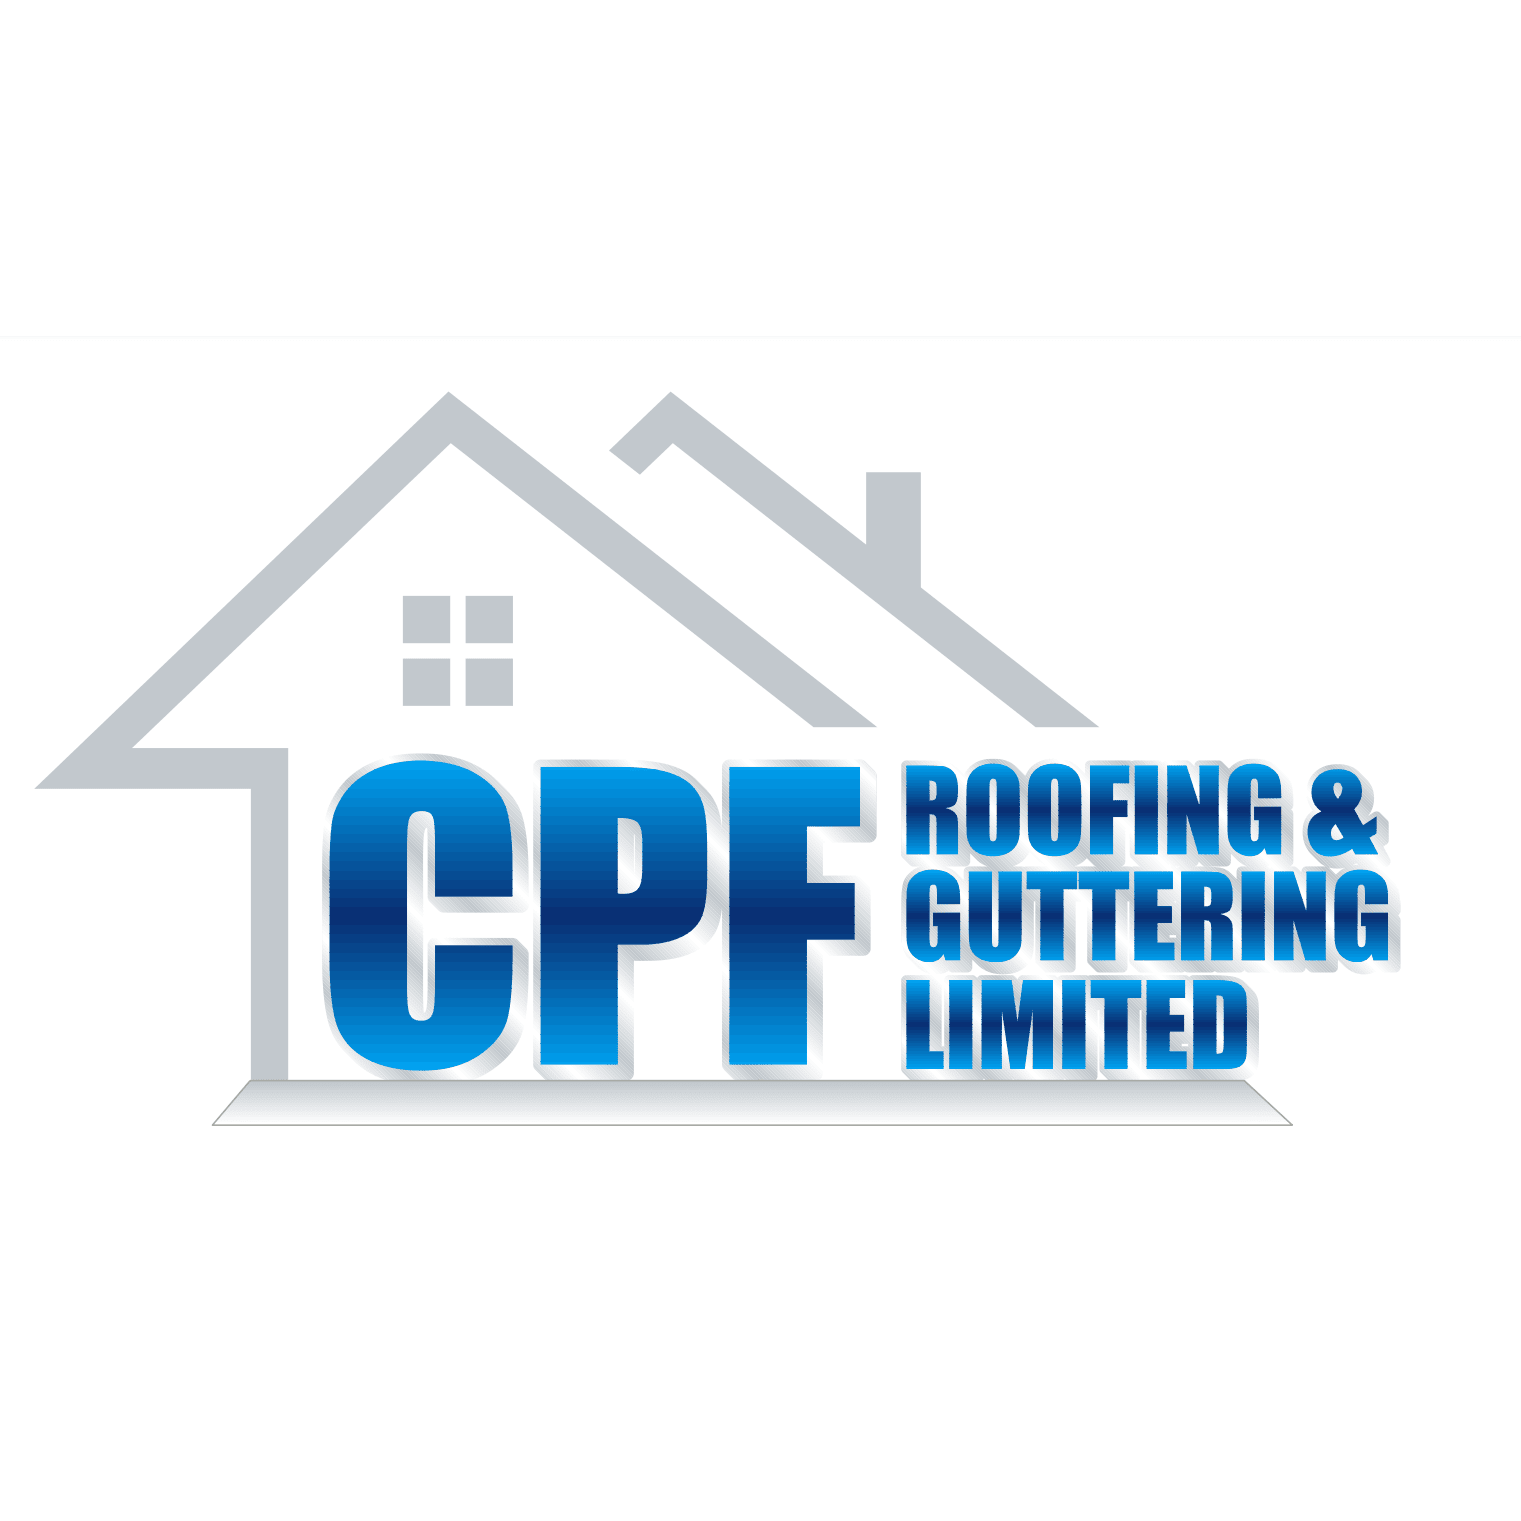 CPF Roofing & Guttering Ltd - Rayleigh, Essex SS6 7JD - 07388 592717 | ShowMeLocal.com